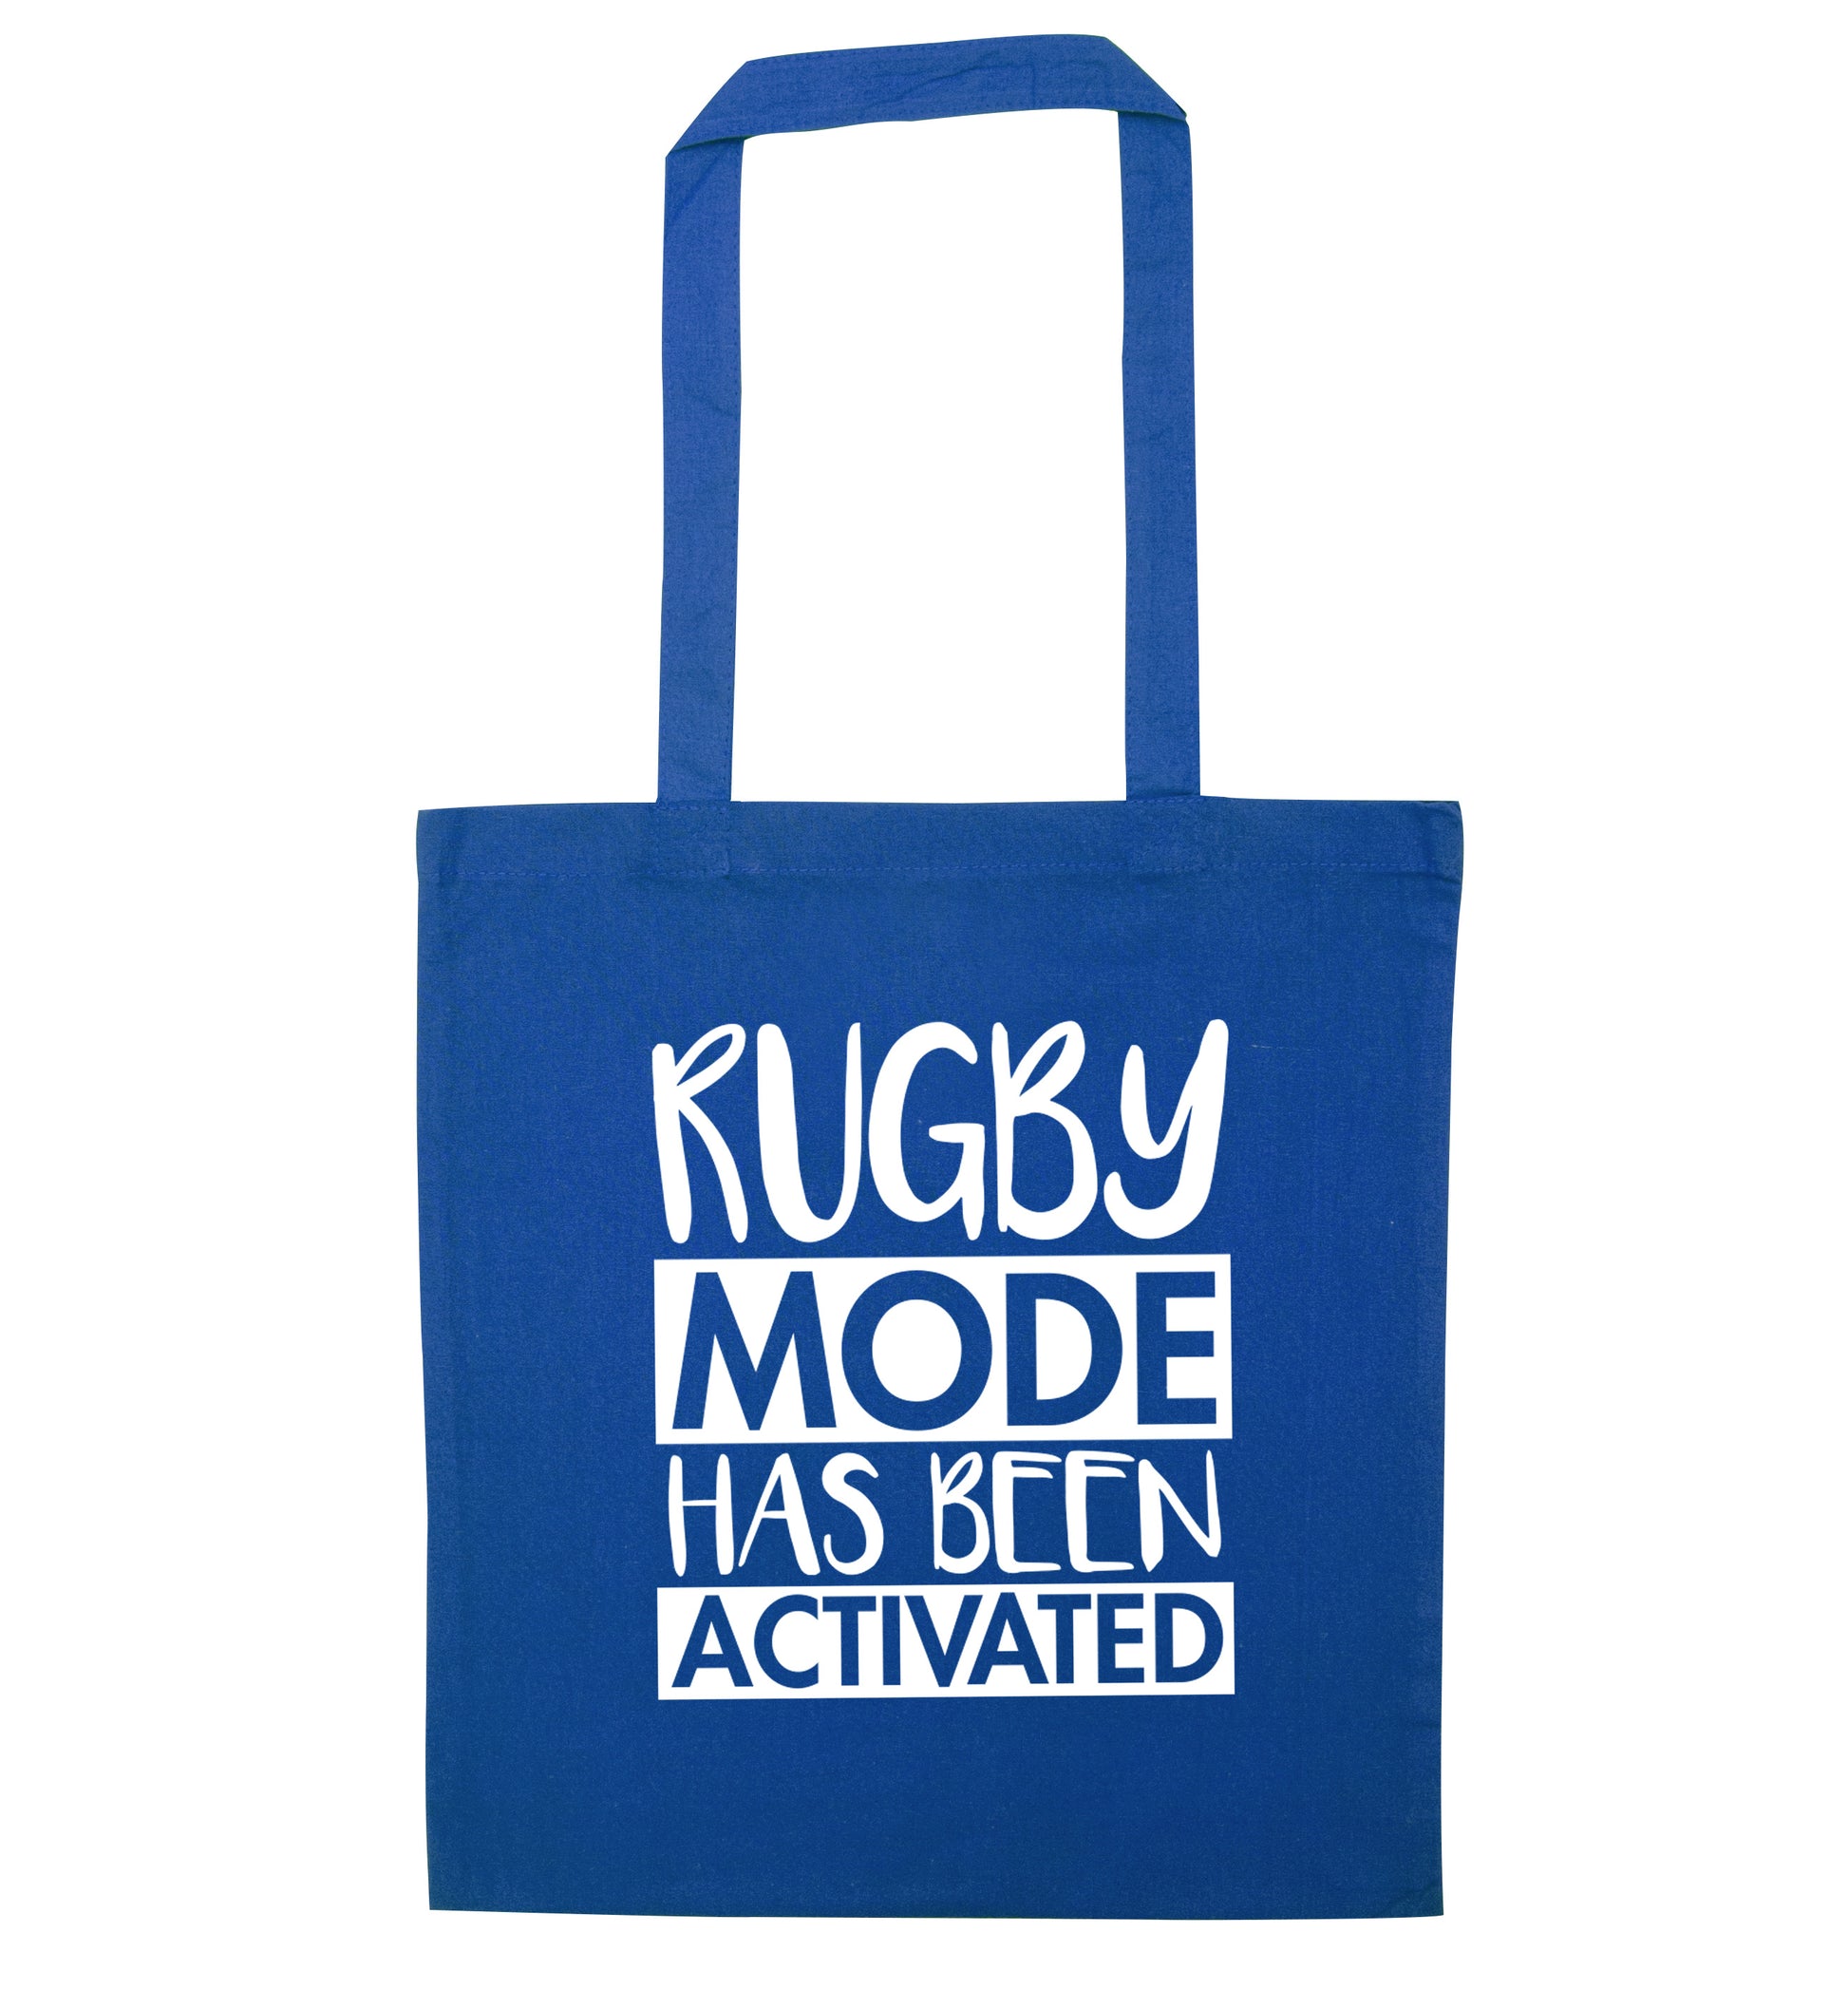 Rugby mode activated blue tote bag